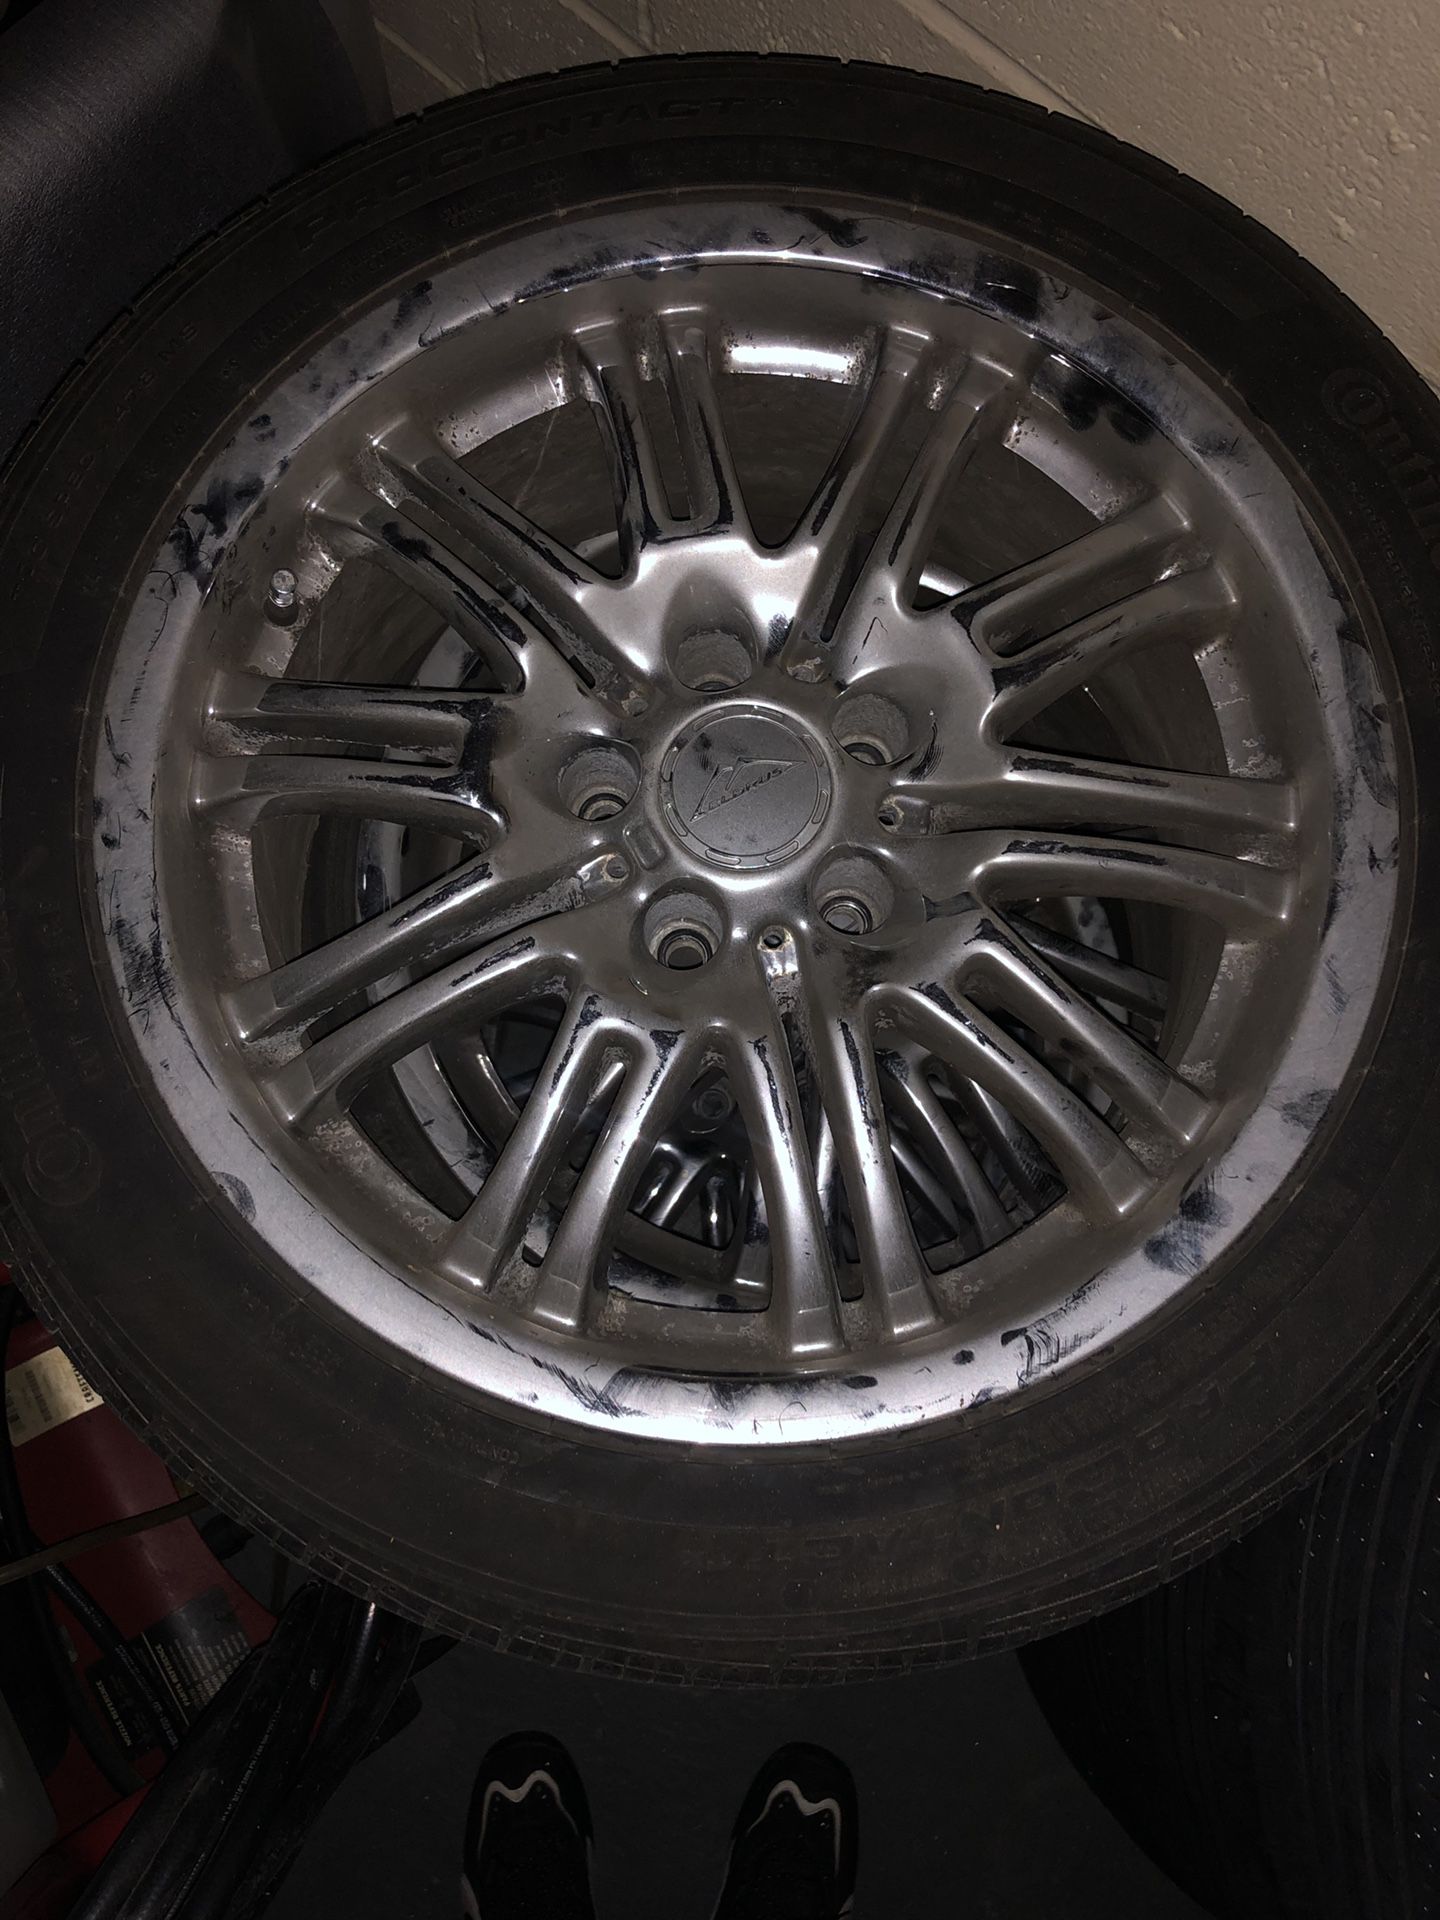 245/45R18 in good condition an 18 inch chrome rims in good condition all rims are good 400$ for all 8.5Jx19 ET48 5x120 2.5